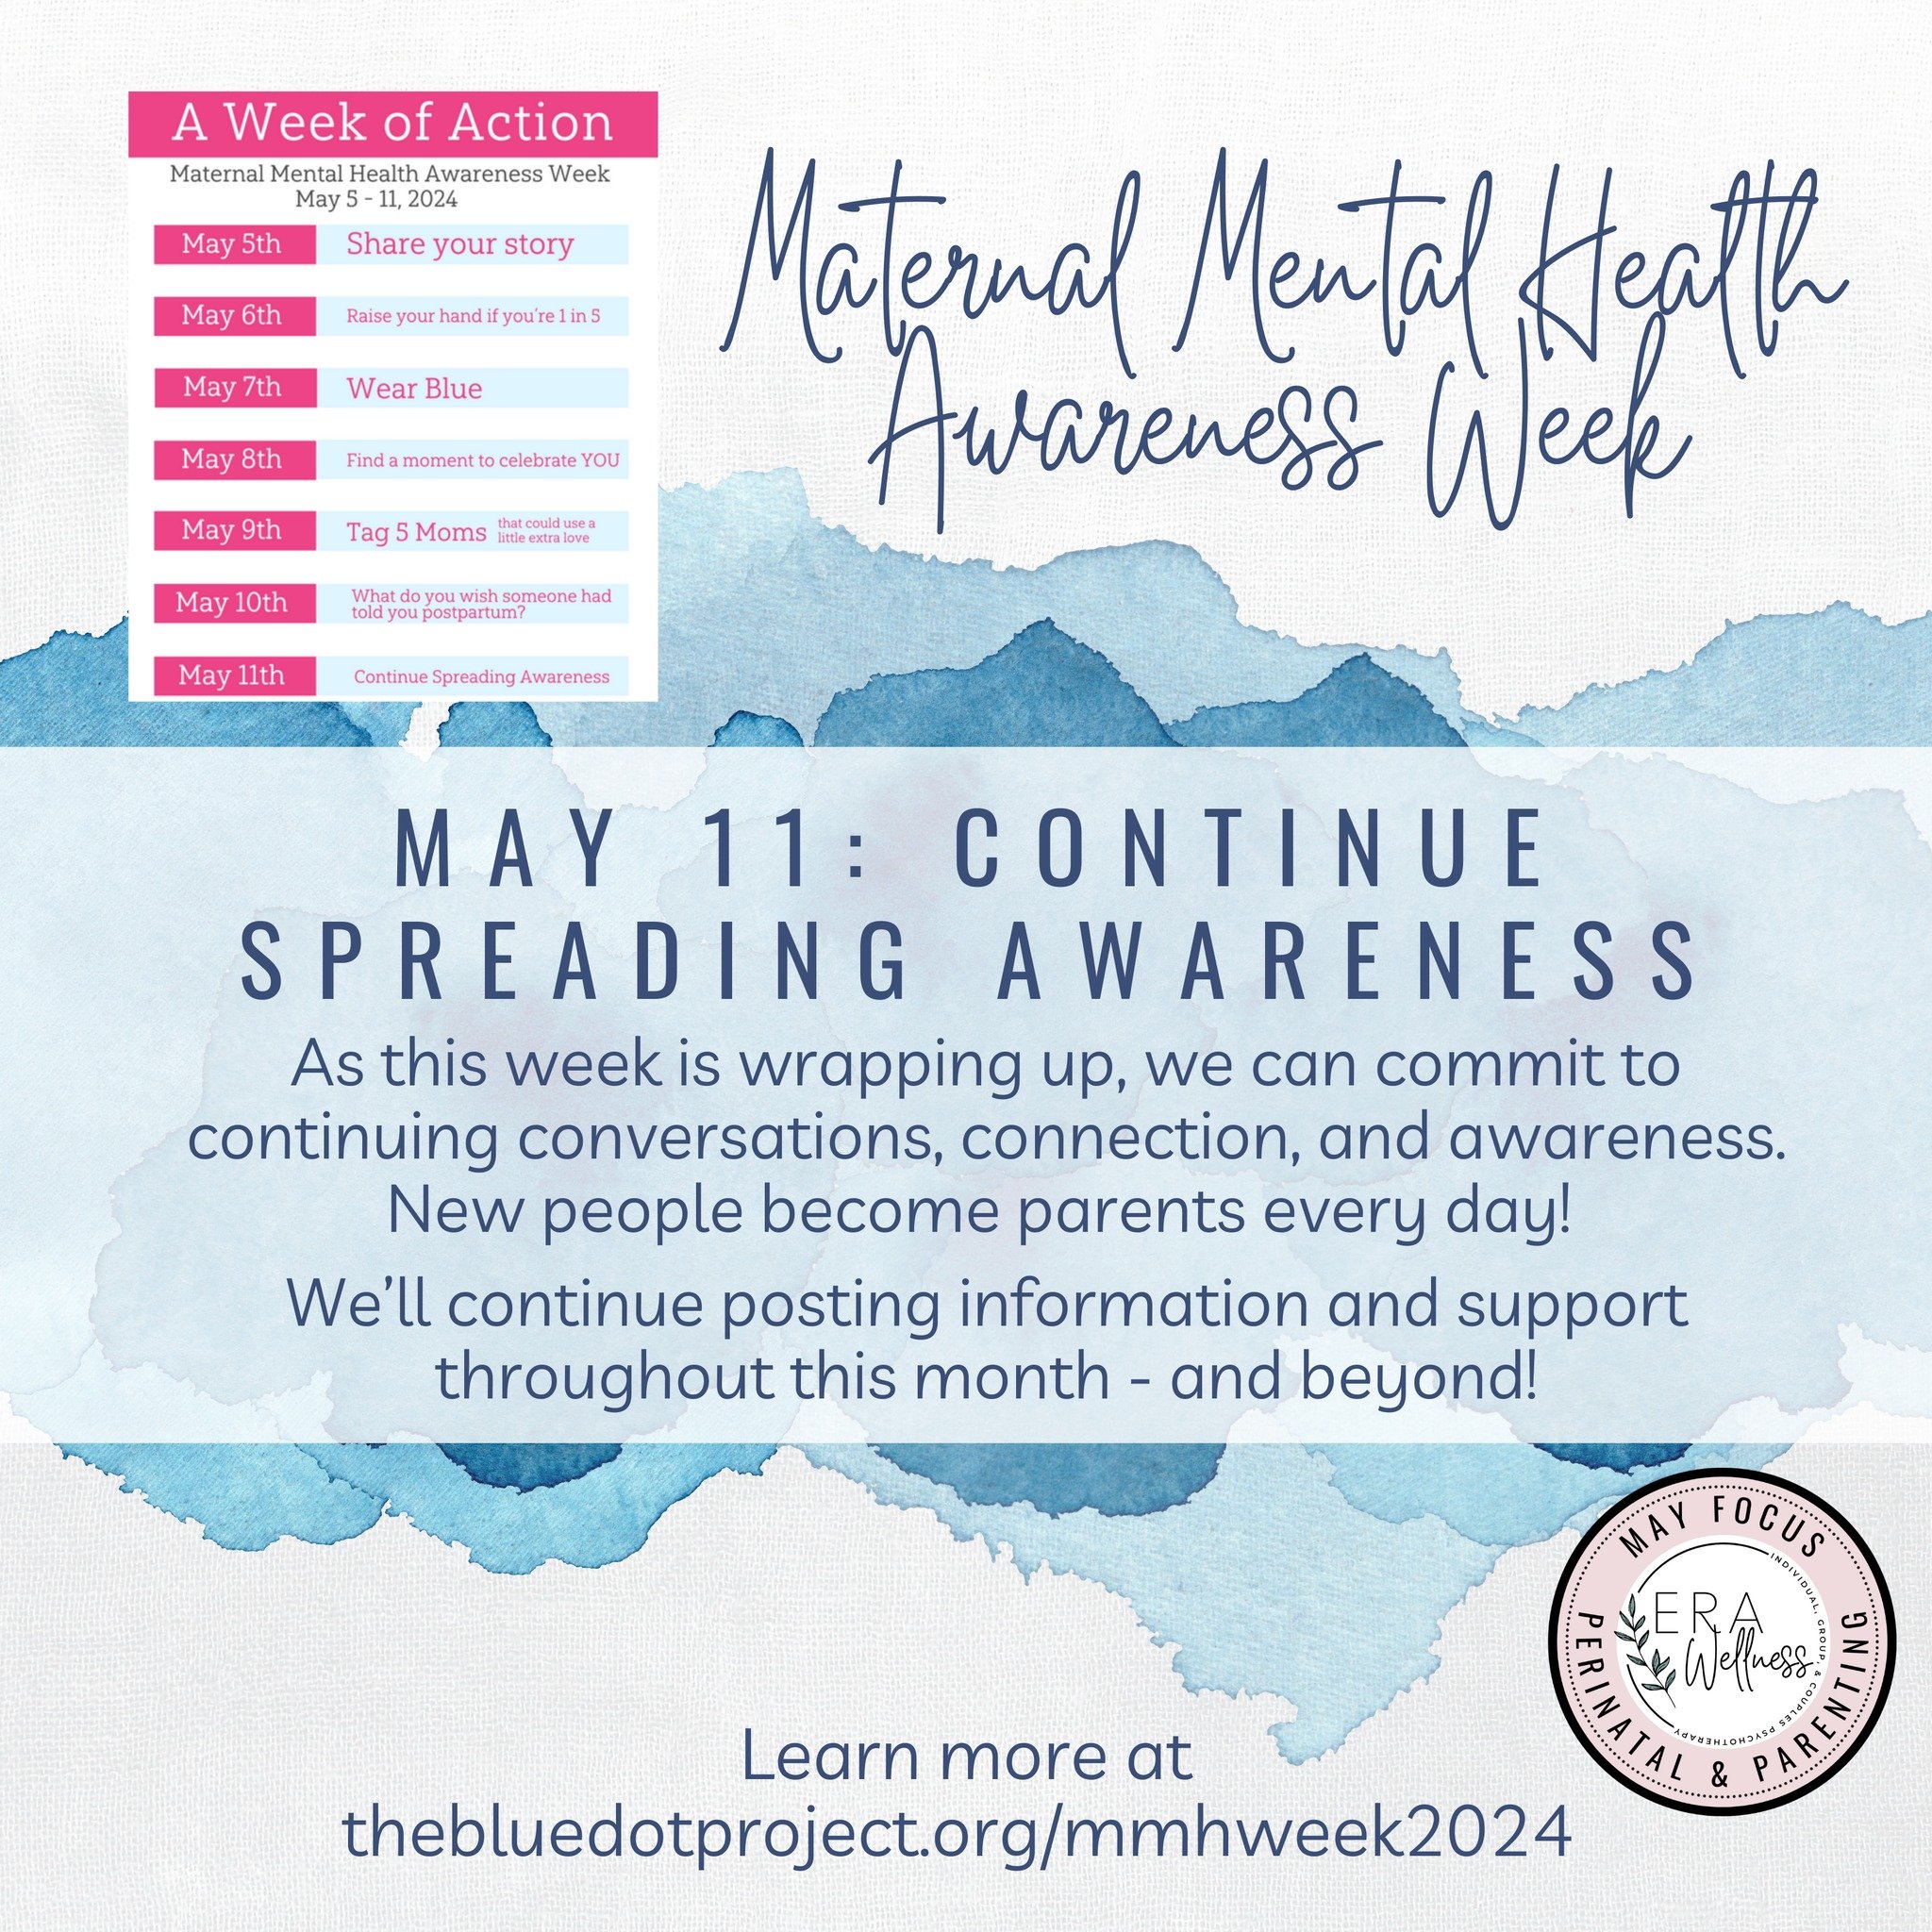 💙 Maternal Mental Health Week 2024 - Storytelling Saves Lives 💙

Saturday, May 11: Continue Spreading Awareness

As this week is wrapping up, we can commit to continuing conversations, connection, and awareness. New people become parents every day!